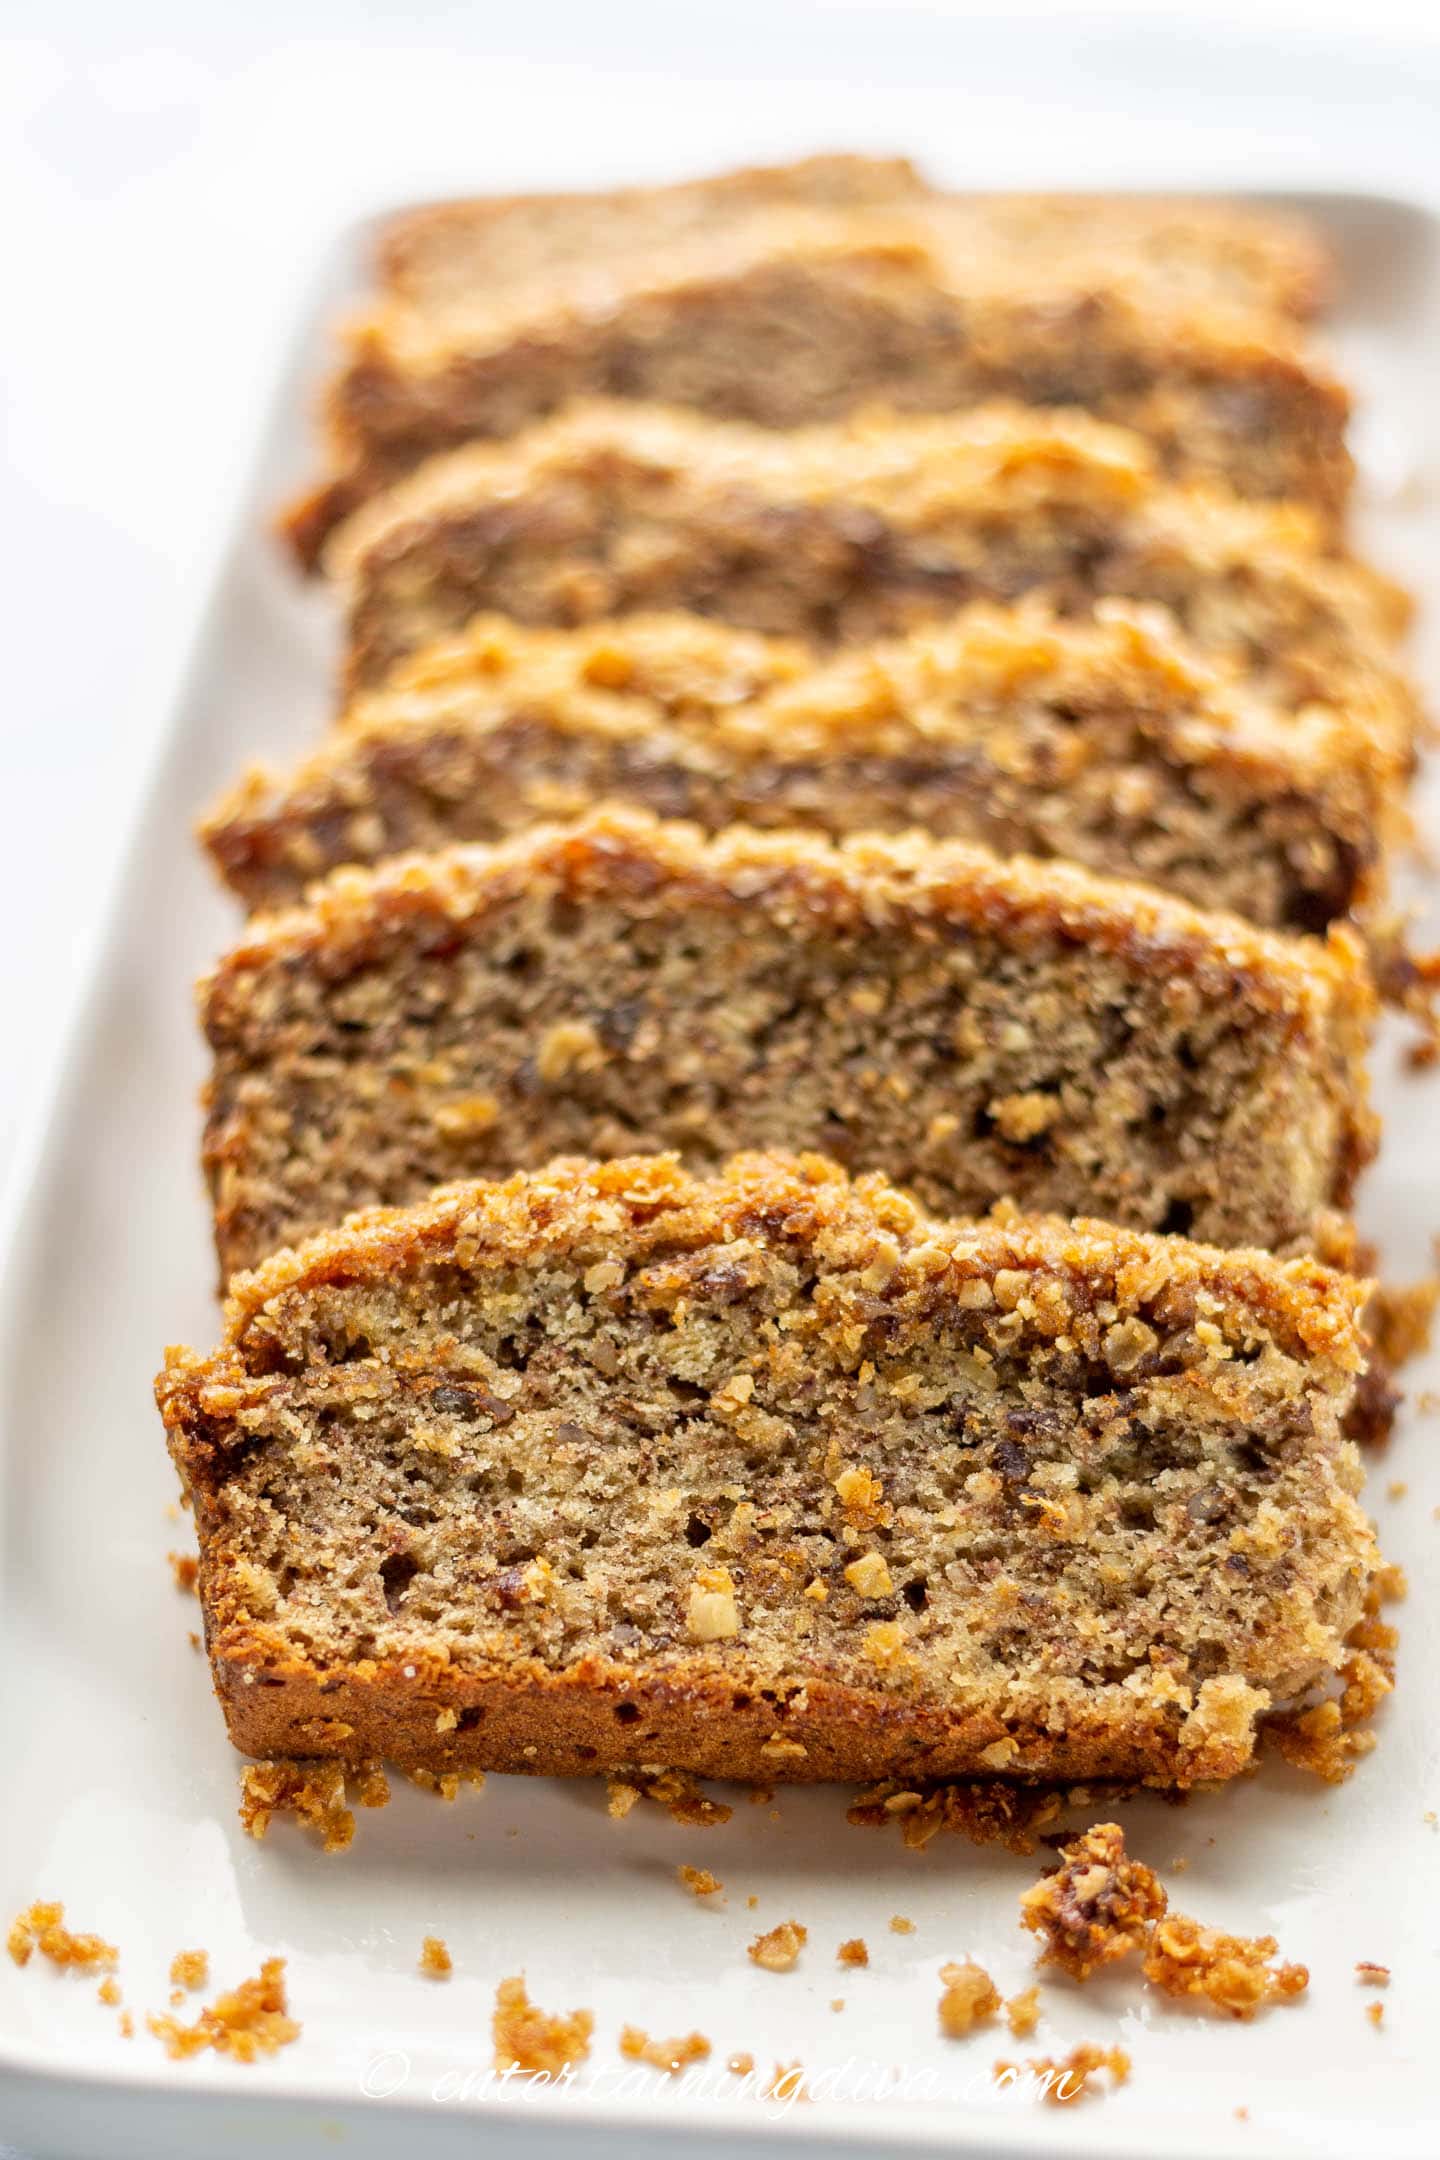 slices of banana nut bread with streusel topping on a plate